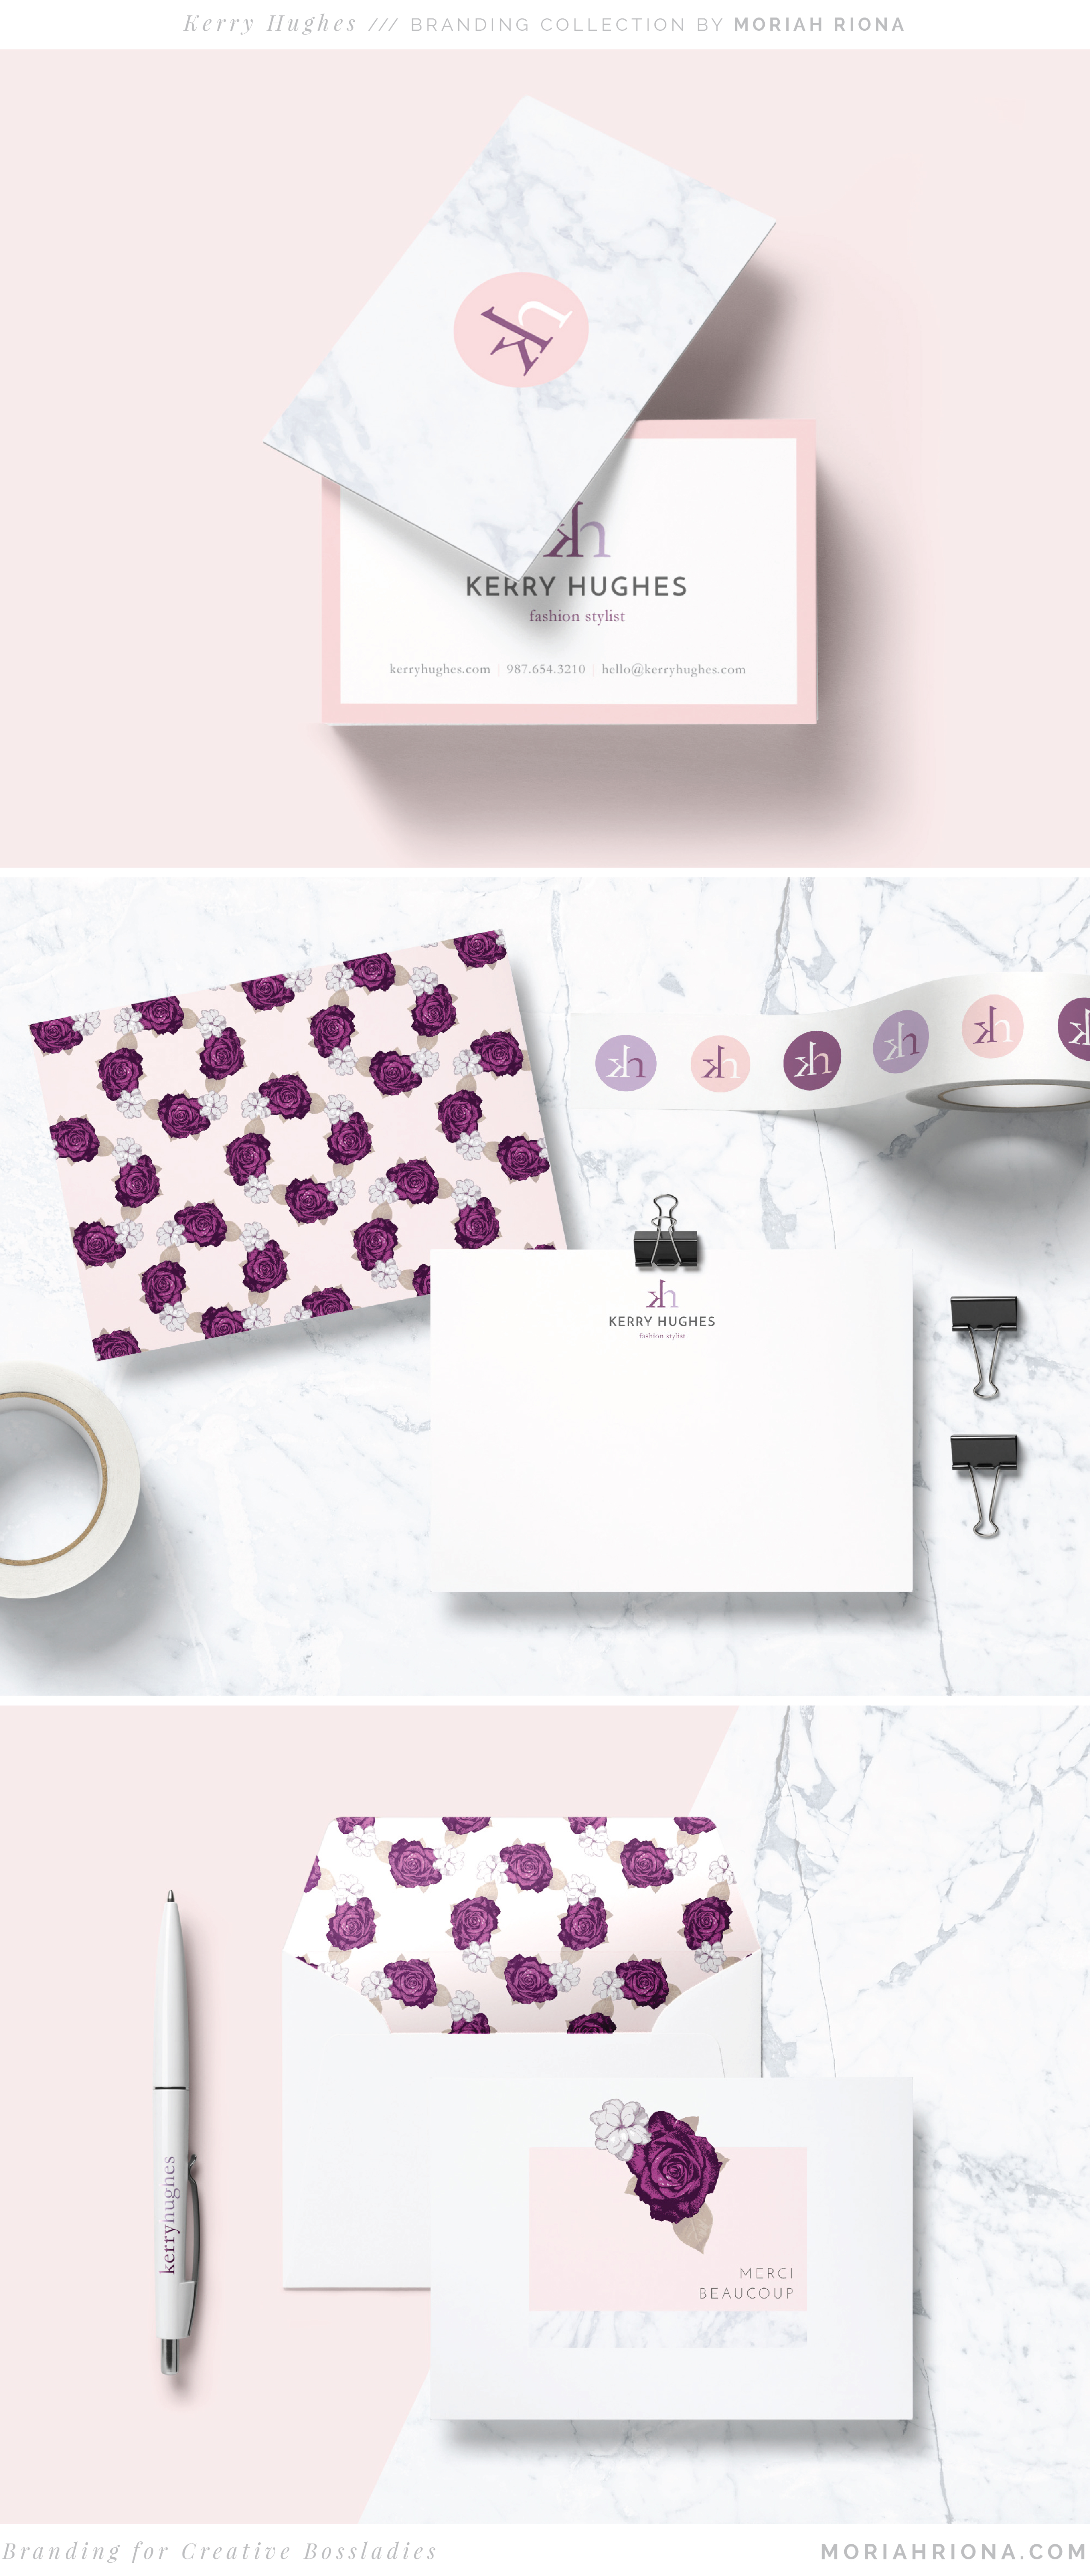 Branded stationery design for a fashion stylist by Moriah Riona